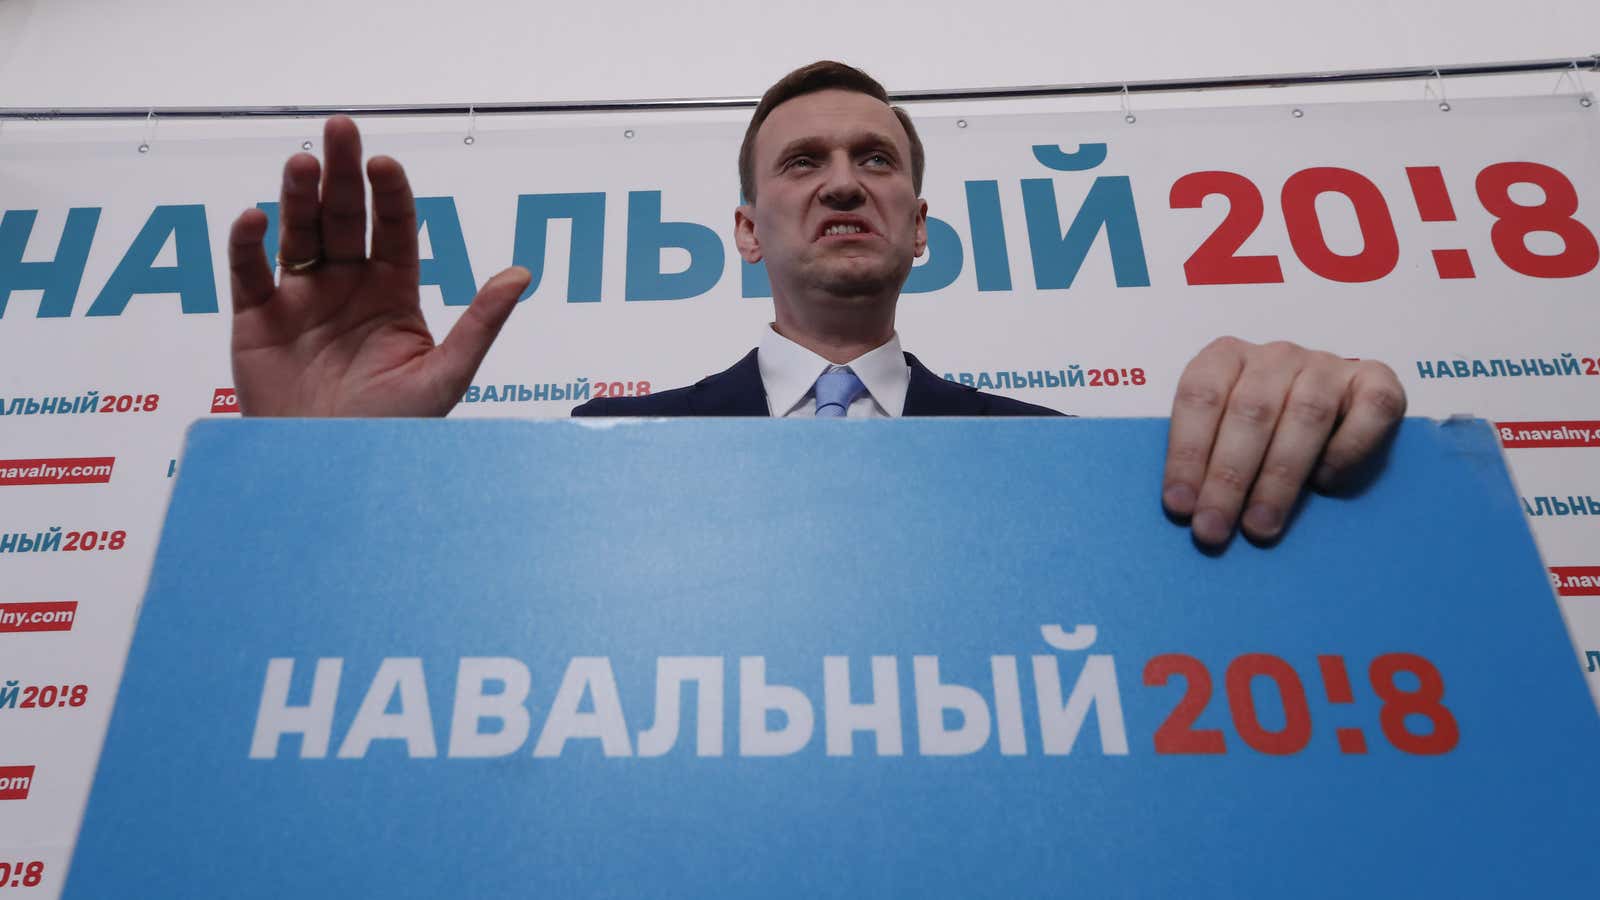 Navalny has been blocked from Russia’s 2018 election.